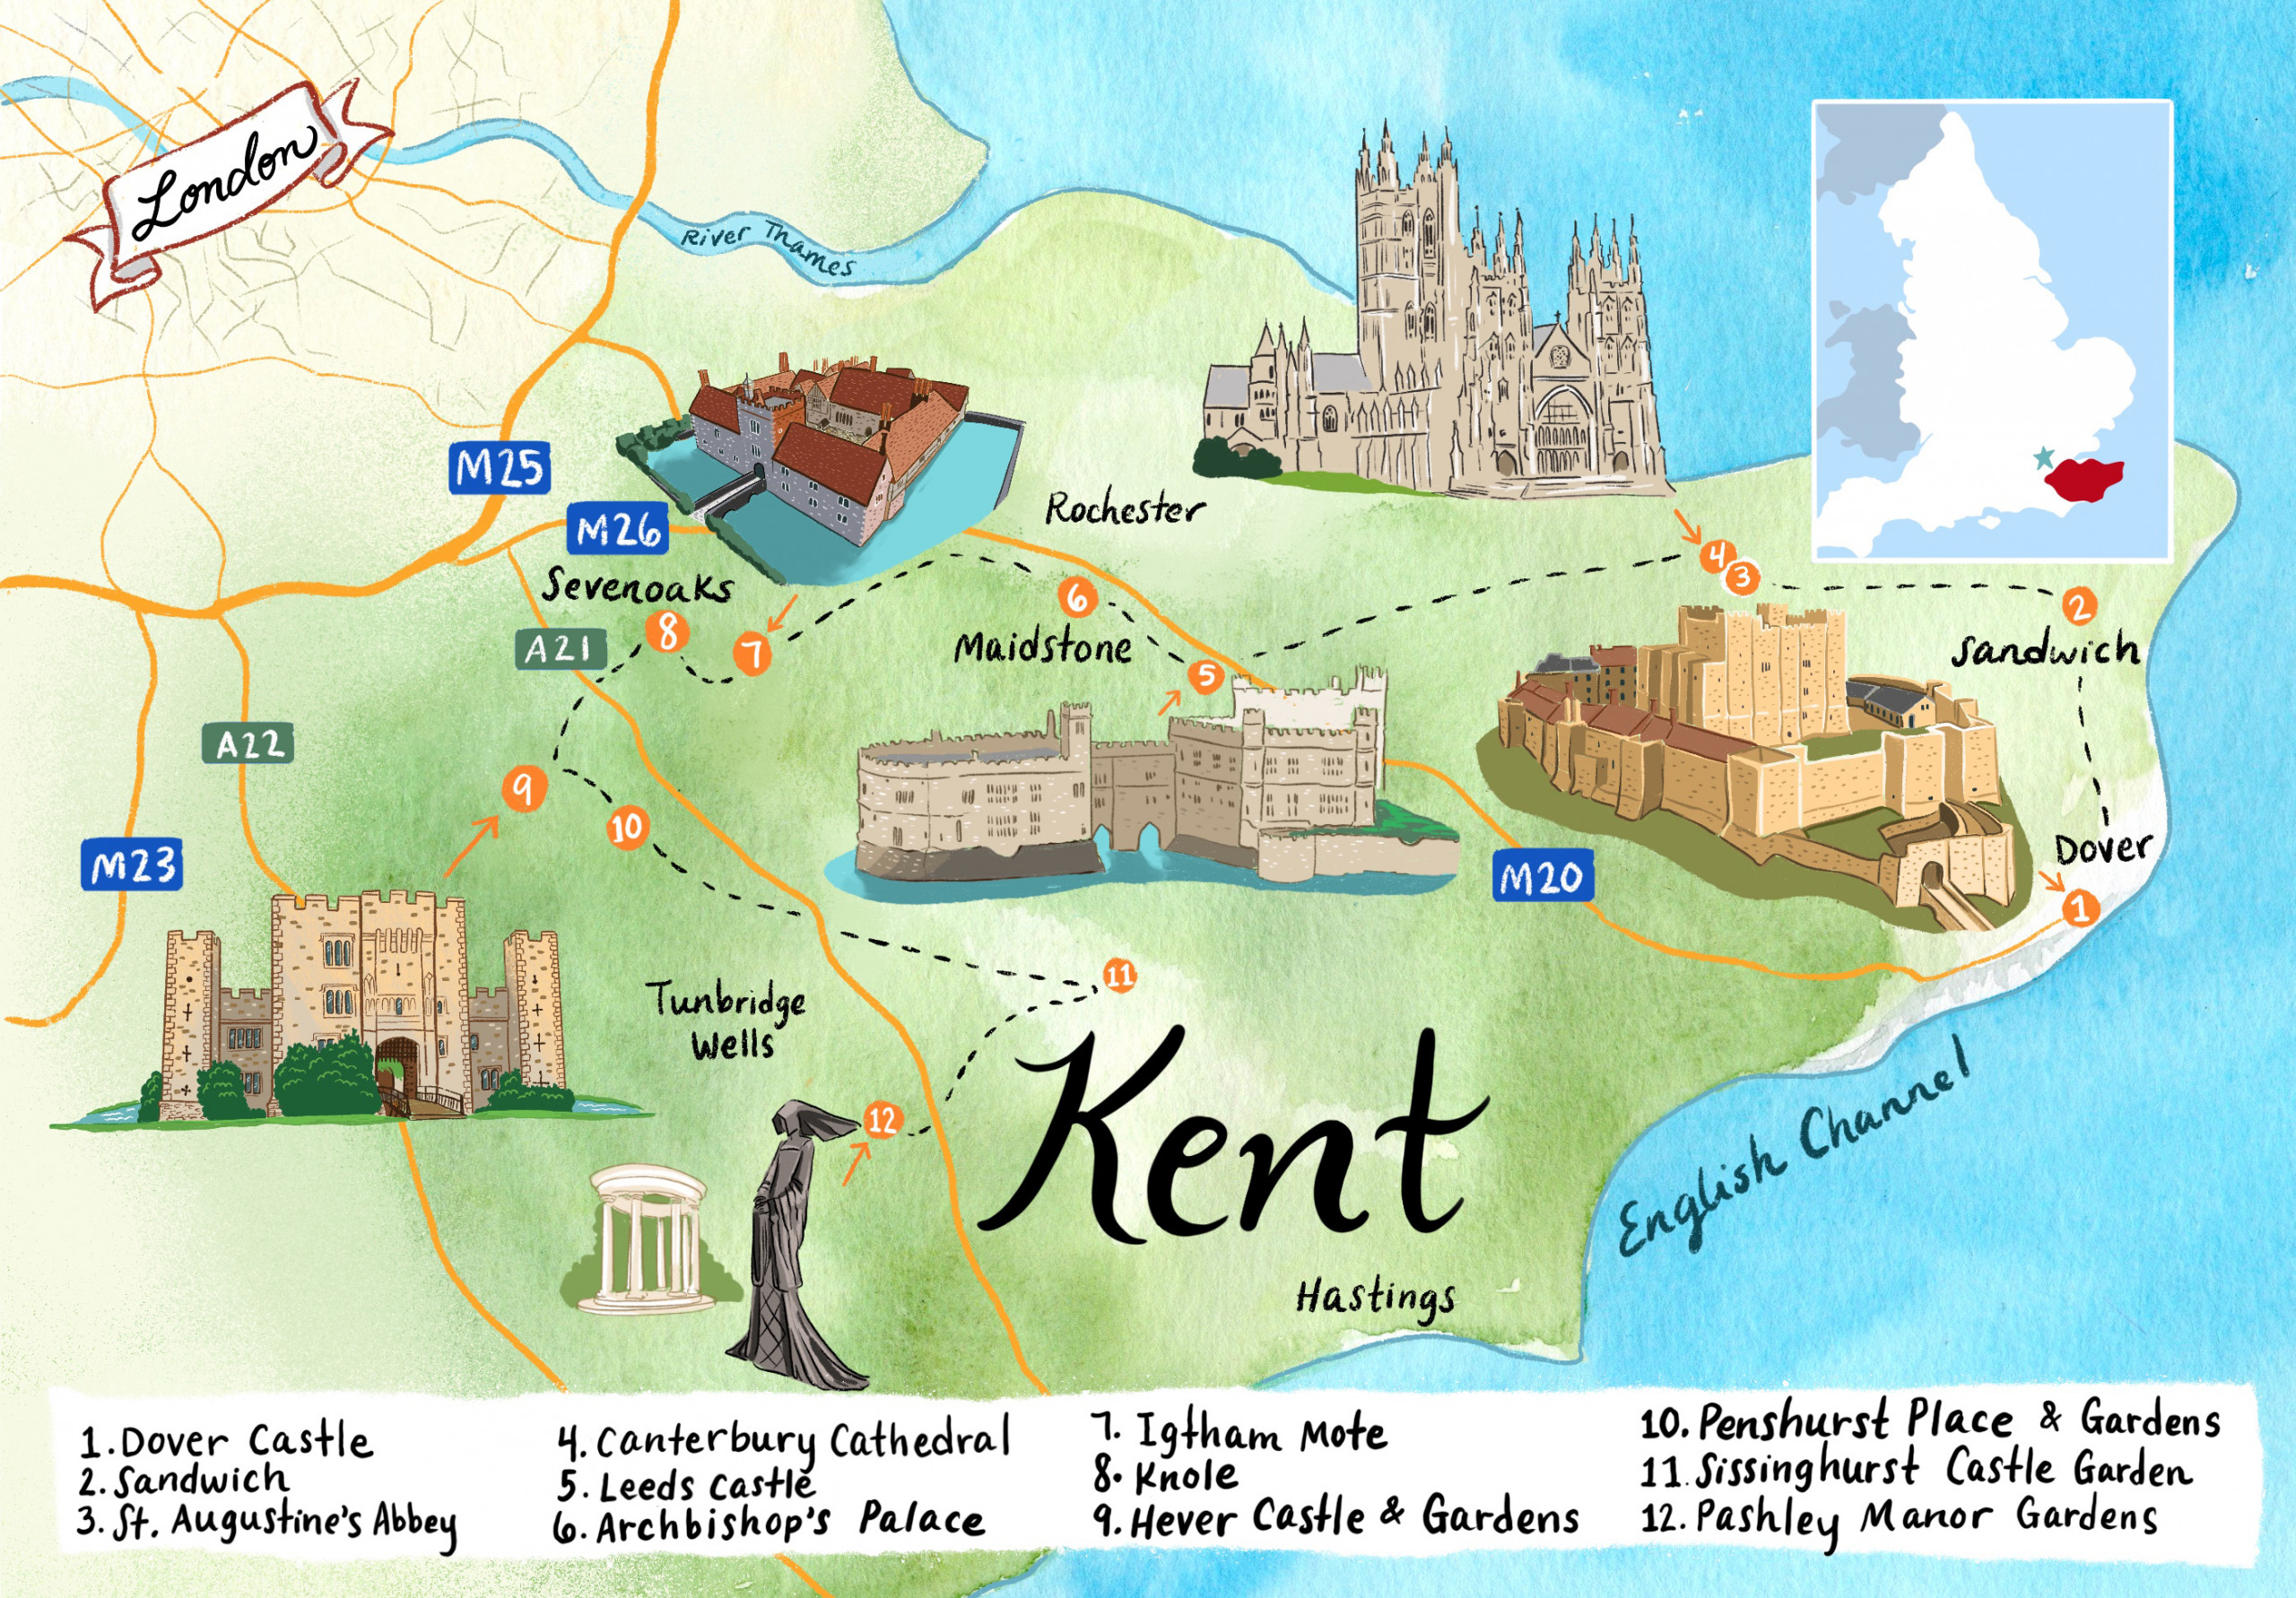 Map of Kent, England for a Tudor Weekend Itinerary